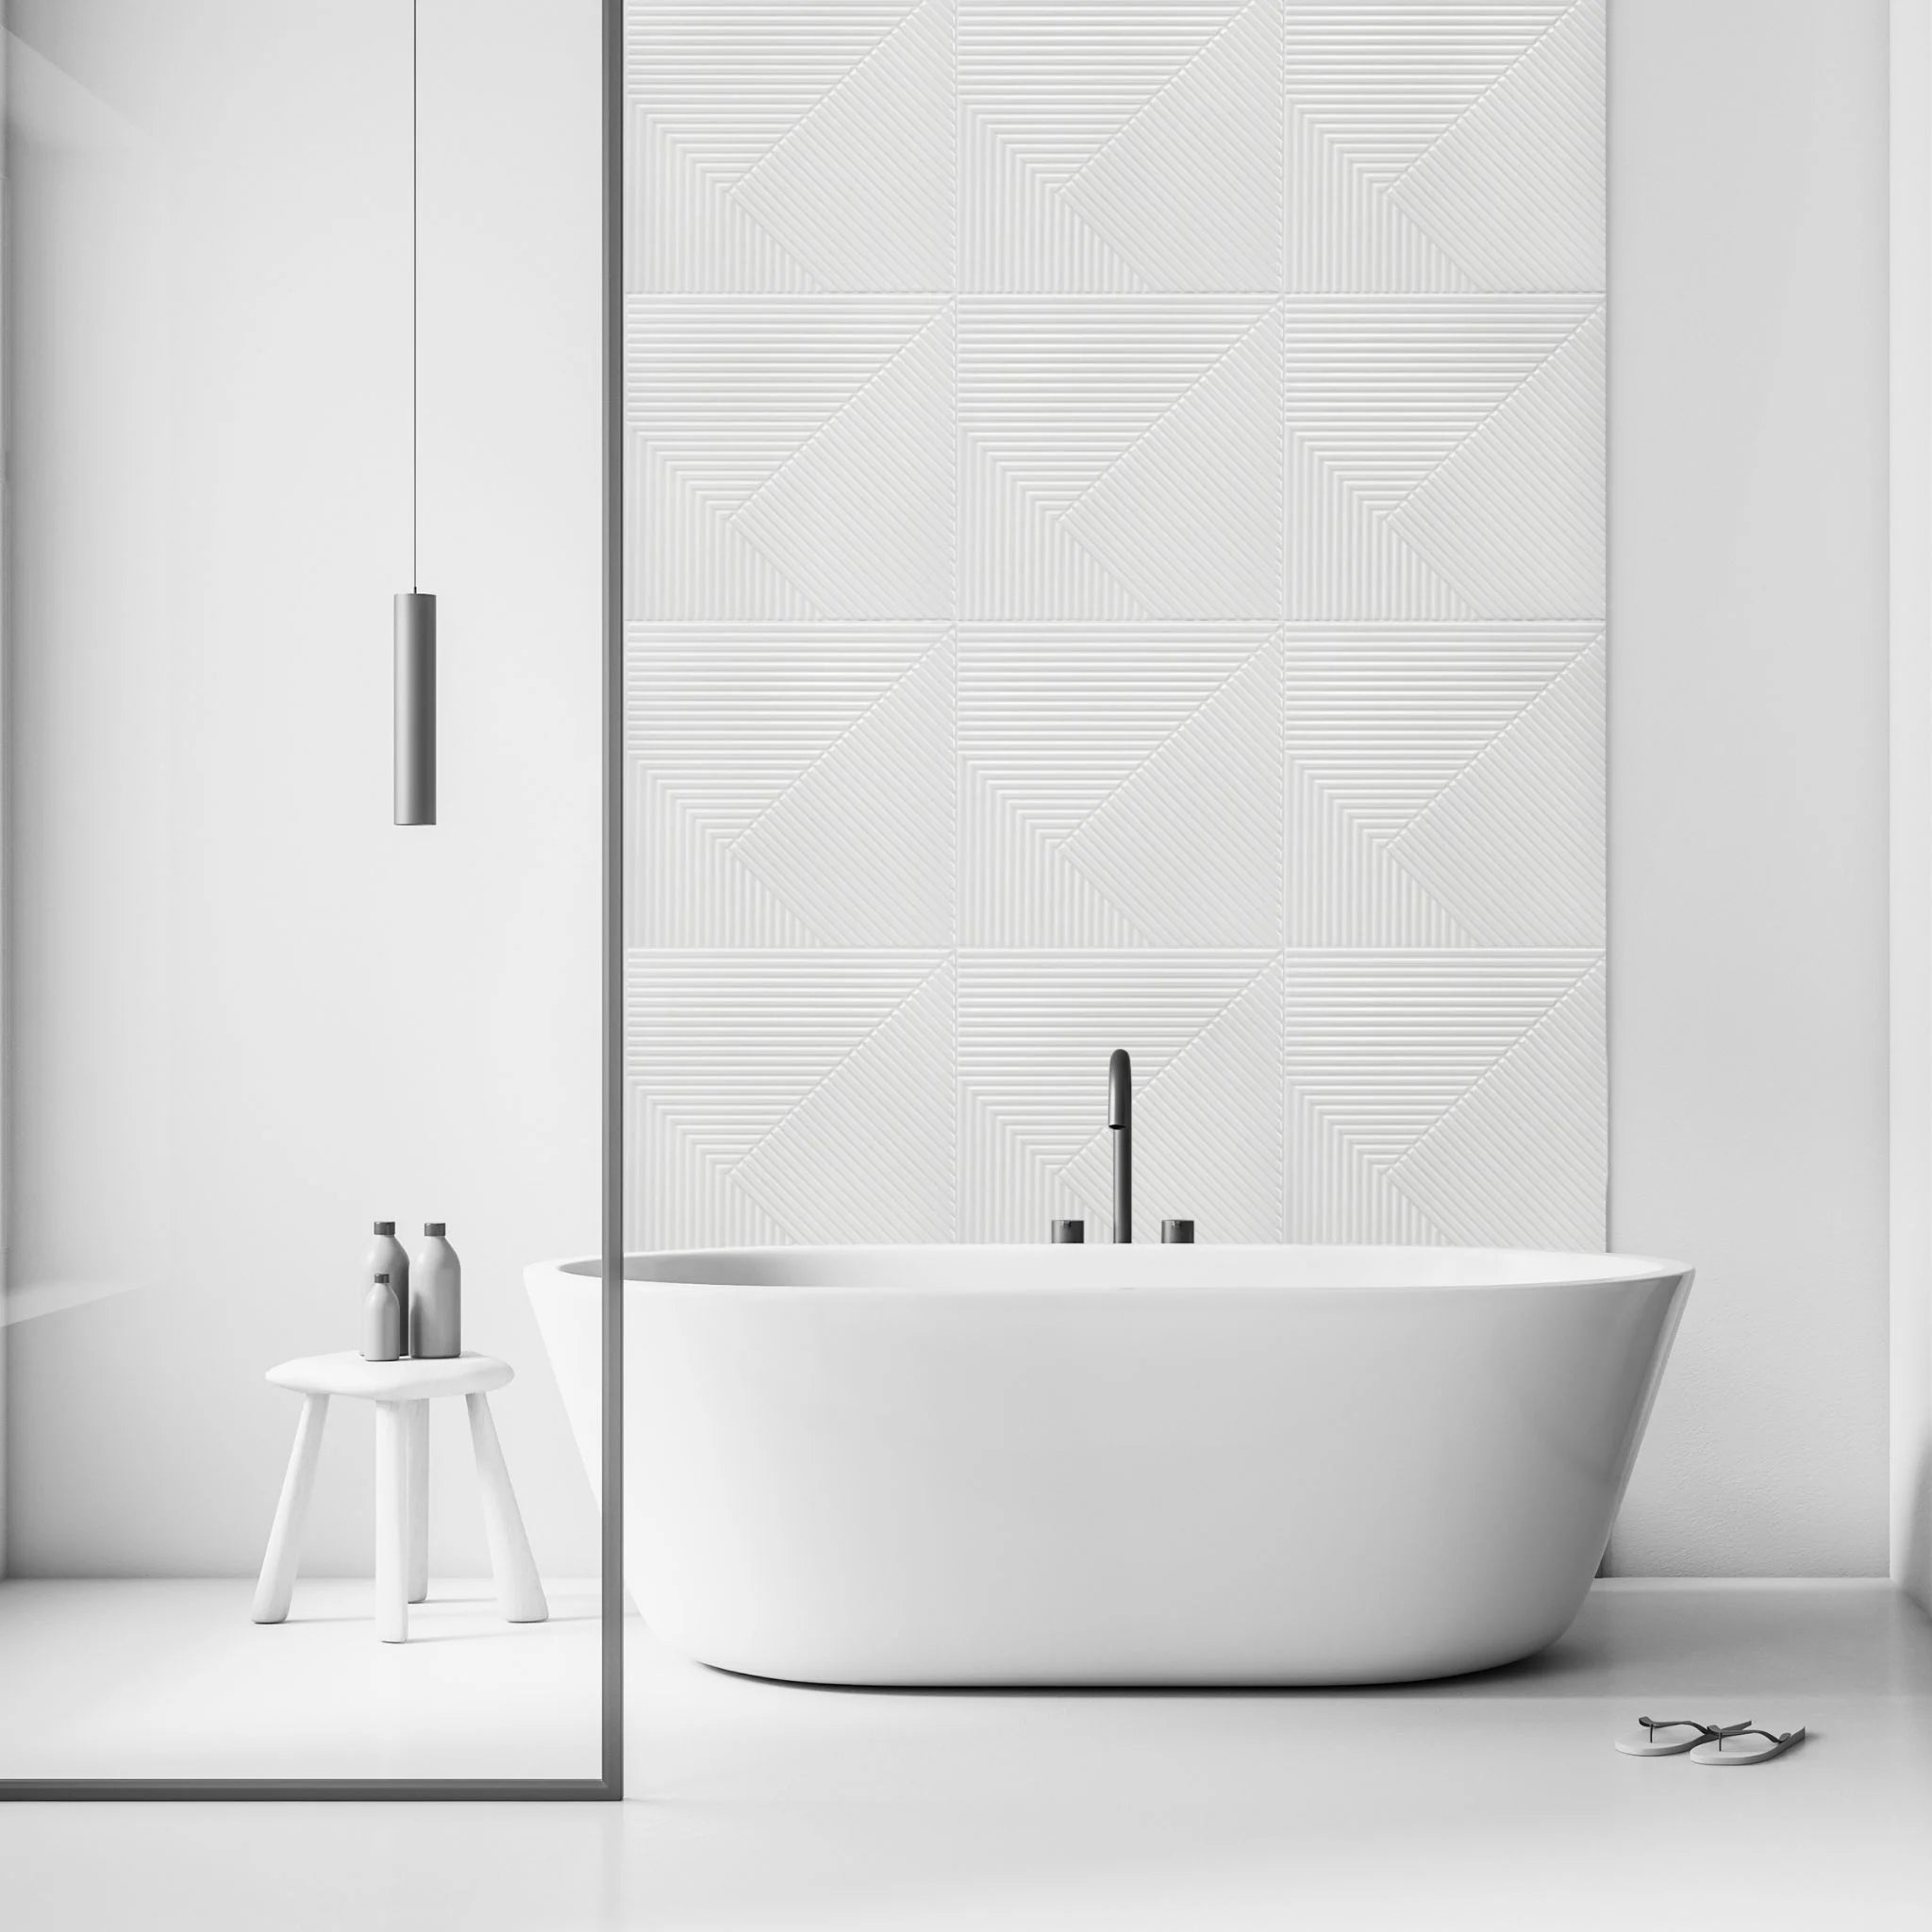 Contemporary bathroom with white geometric PVC wall panels